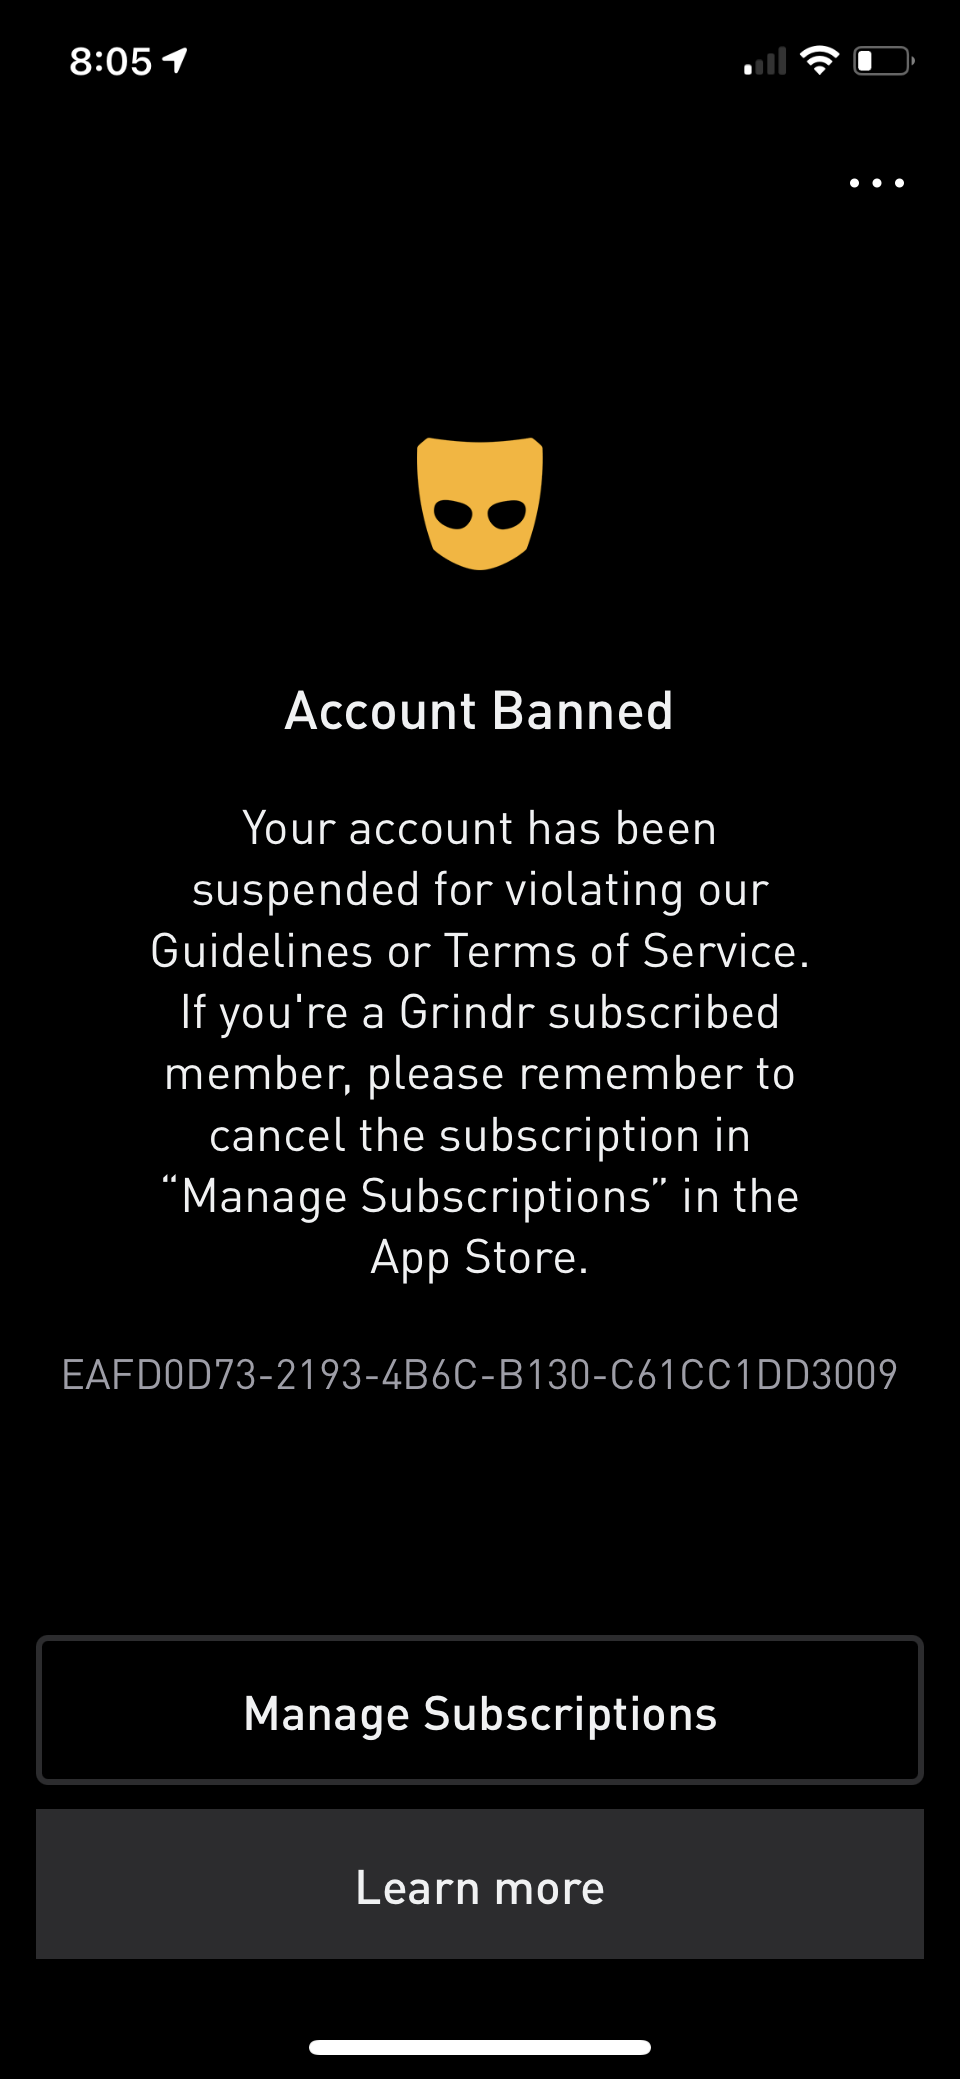 Grindr complaint Banned without proper cause, appealed and won yet rep refuses to help me fix their improper ban